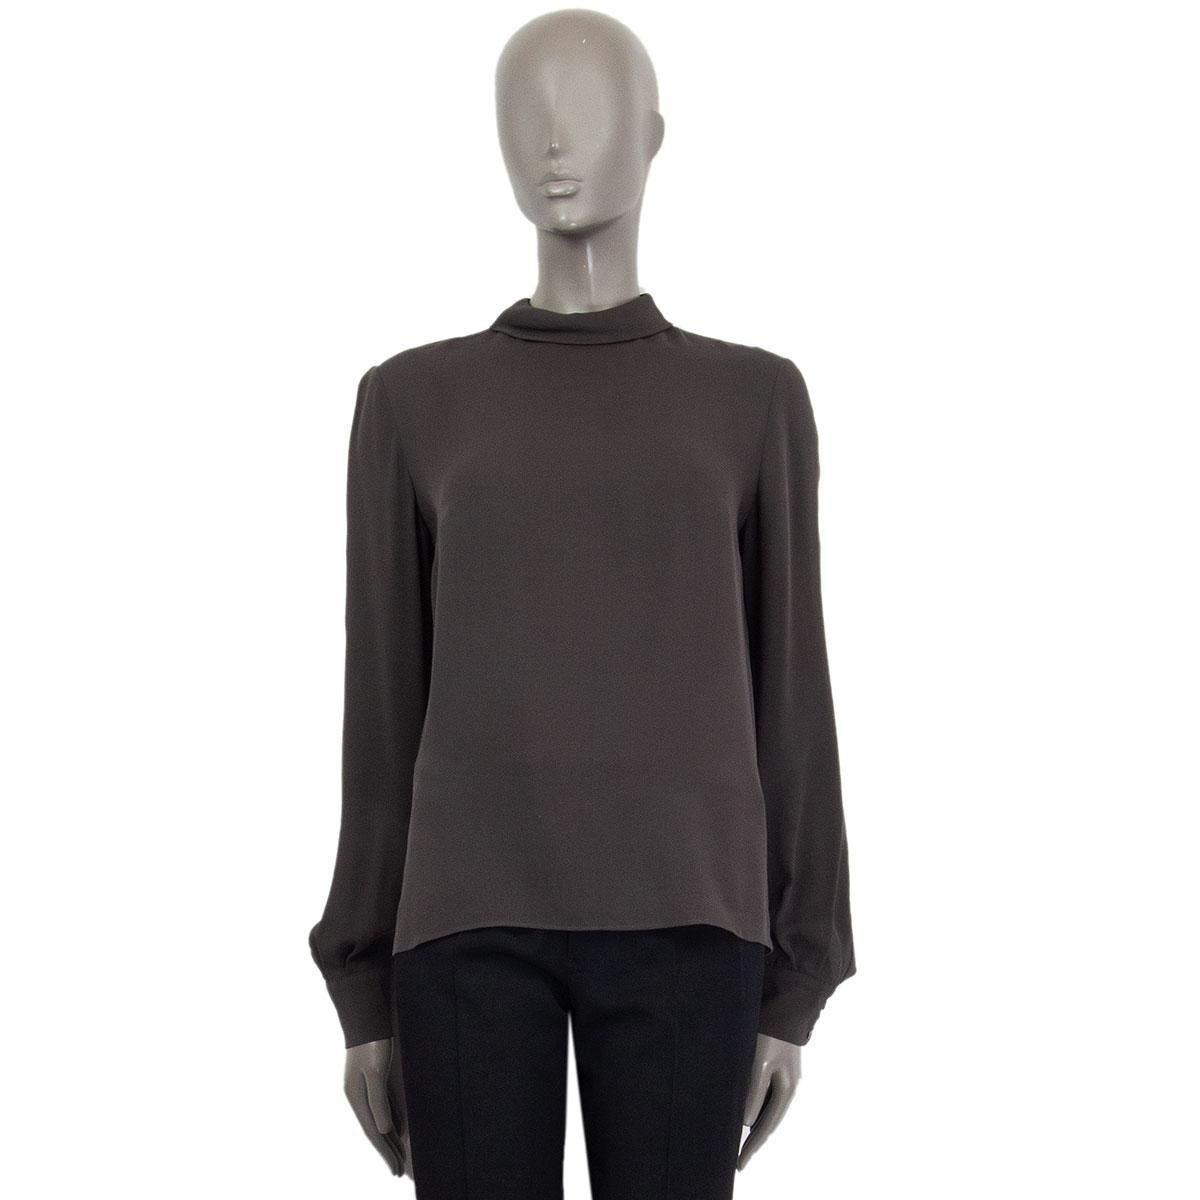 authentic Stella McCartney long sleeve blouse in charcoal silk (100%). Opens with a zipper on the back. Has been worn with a very faint deodorant stain on the right armpit. Overall in very good condition. 

Tag Size 40
Size S
Shoulder Width 41cm